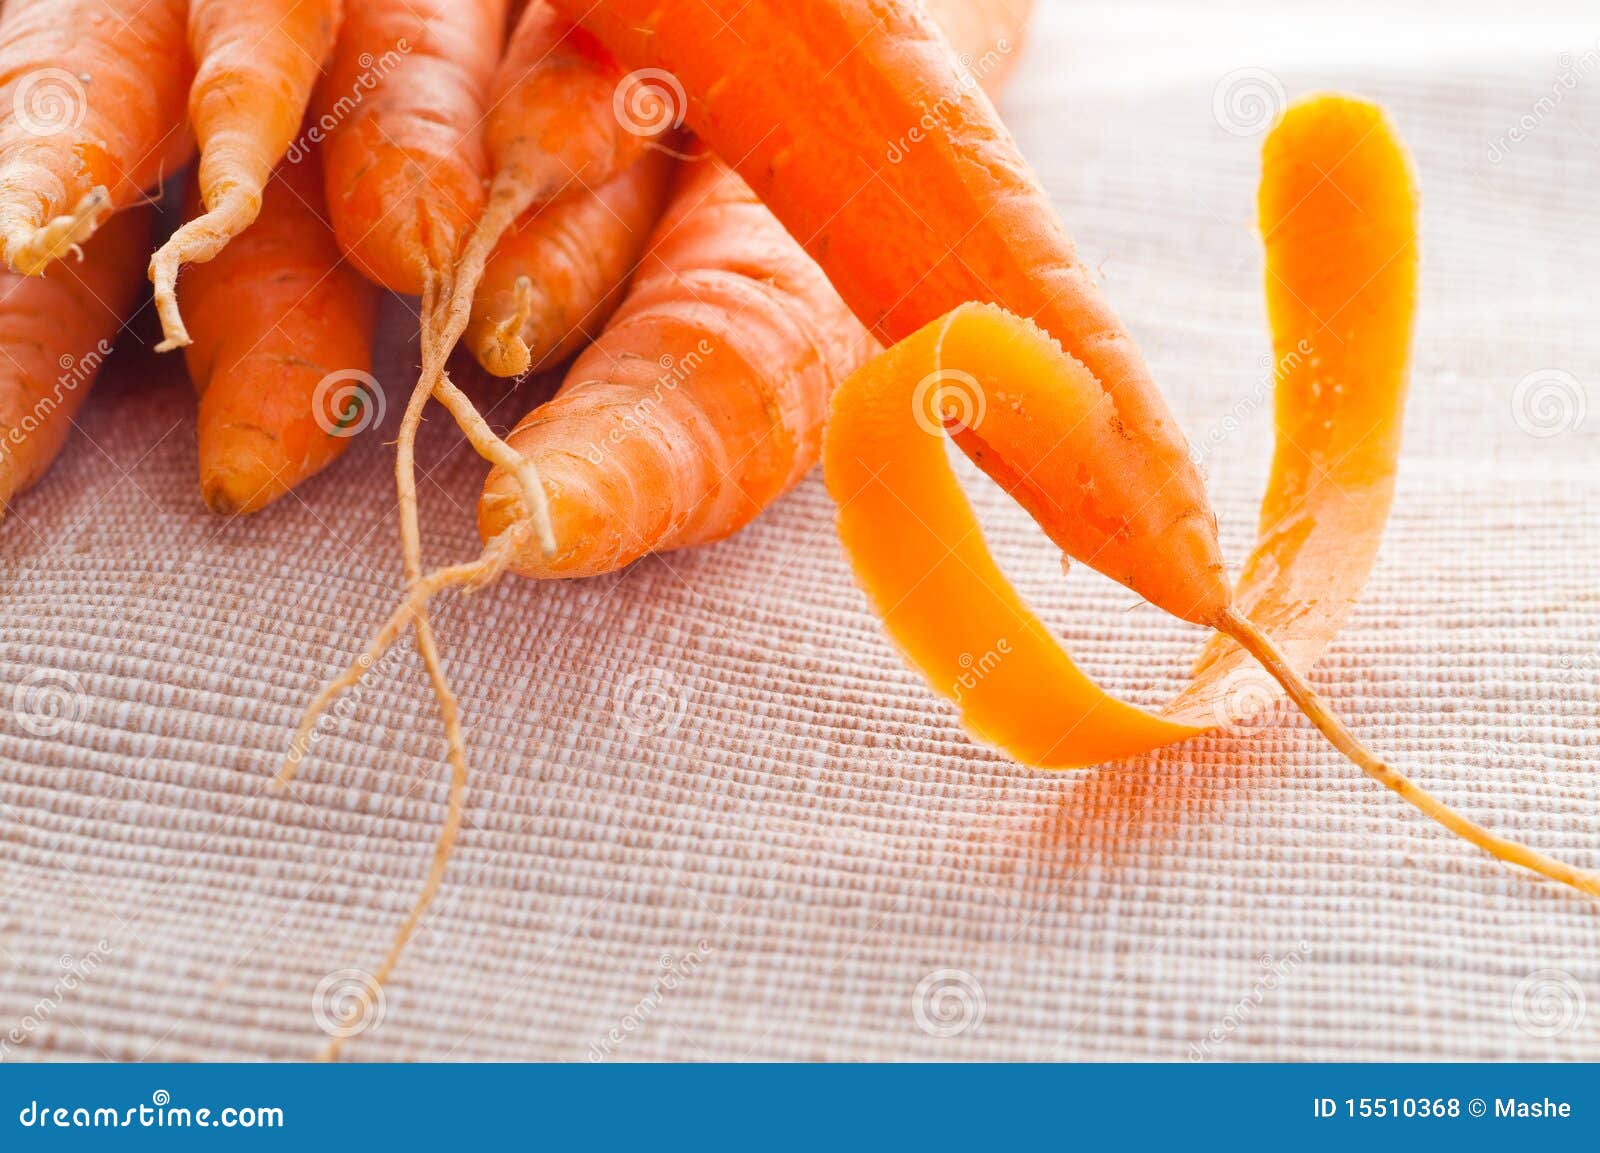 Carrot Group 6